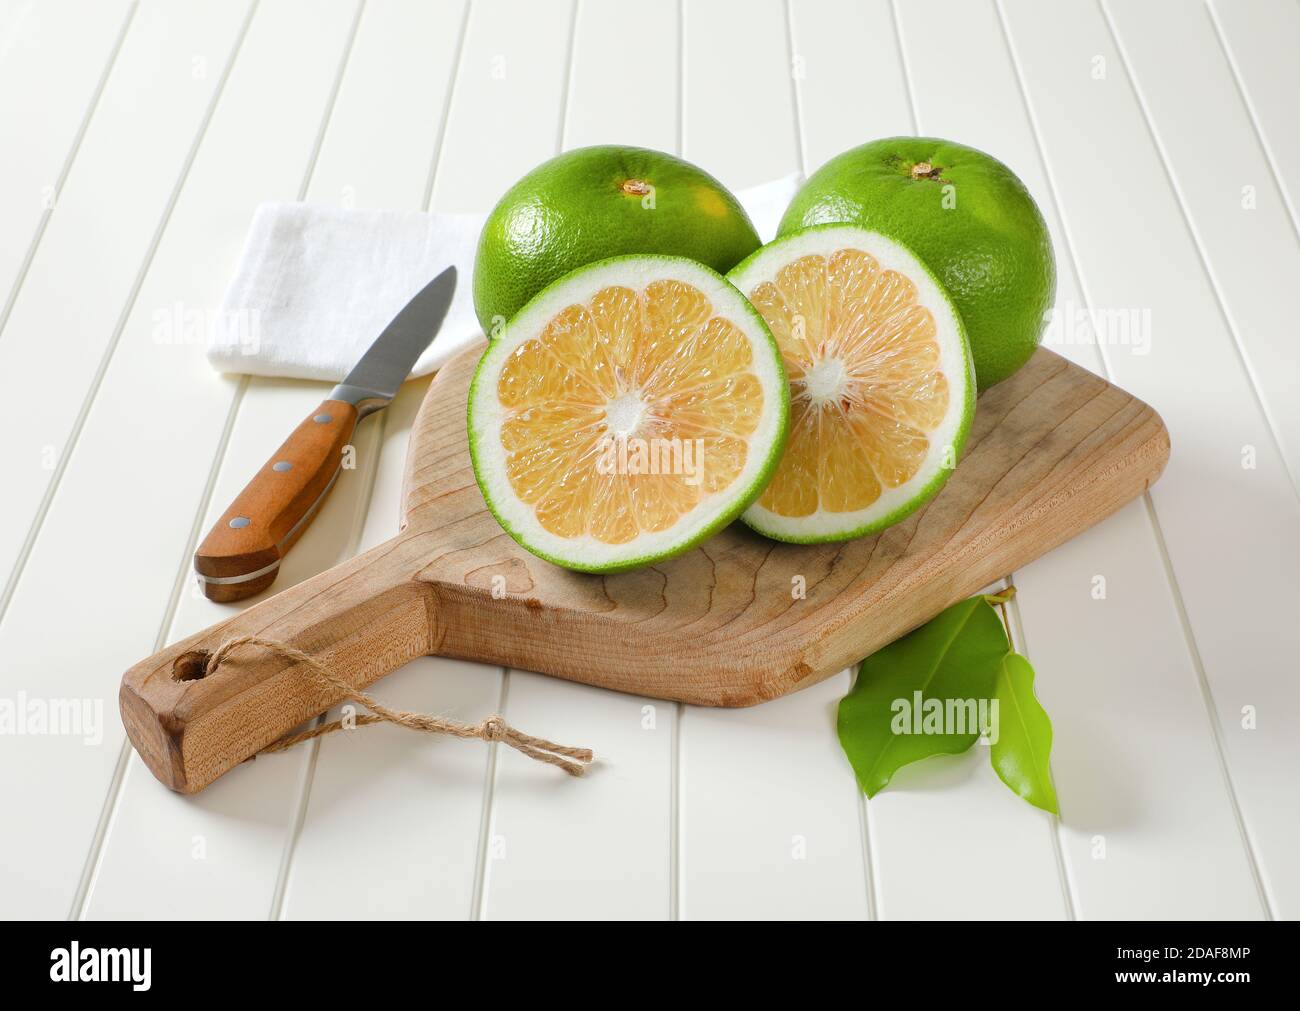 Sweetie fruits (green grapefruits, pomelits) - two whole fruits and slices - on cutting board Stock Photo